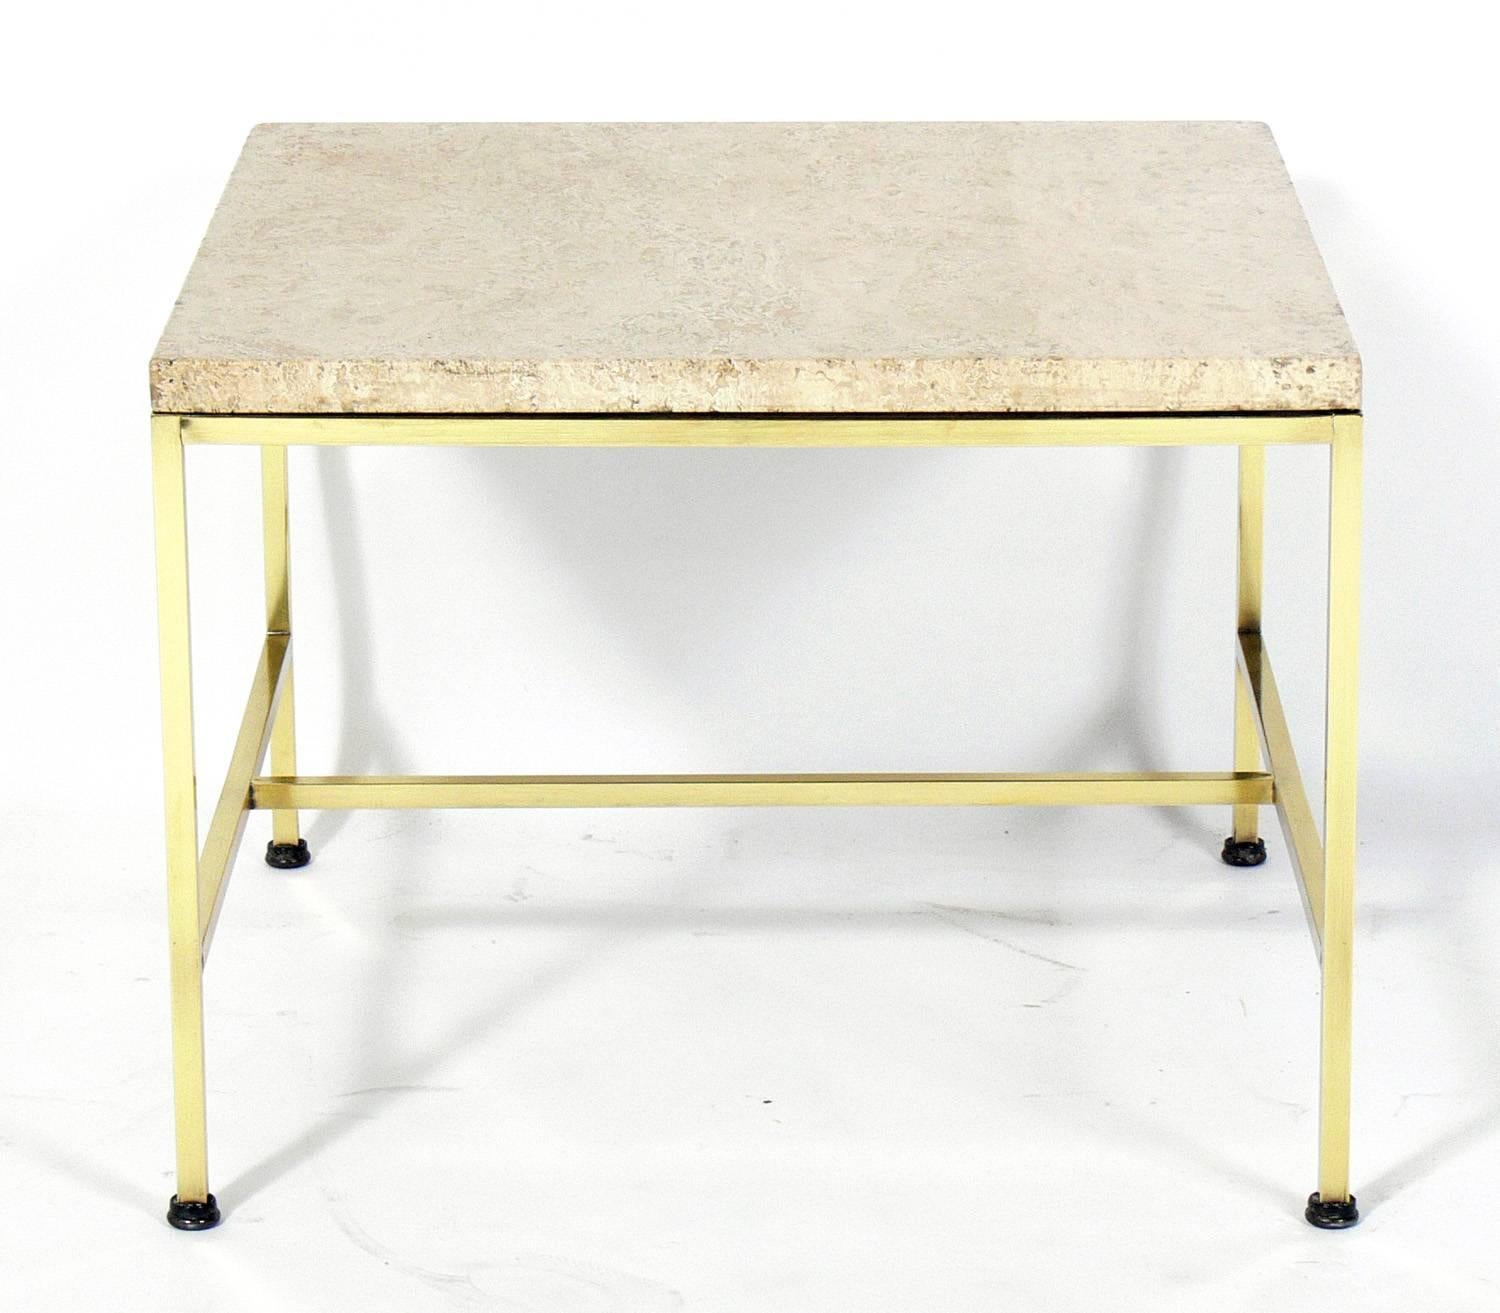 Brass and travertine side table, designed by Paul McCobb, American, circa 1950s. It is a versatile size and can be used as a side or end table, or as a nightstand. Brass frame has been polished and lacquered.